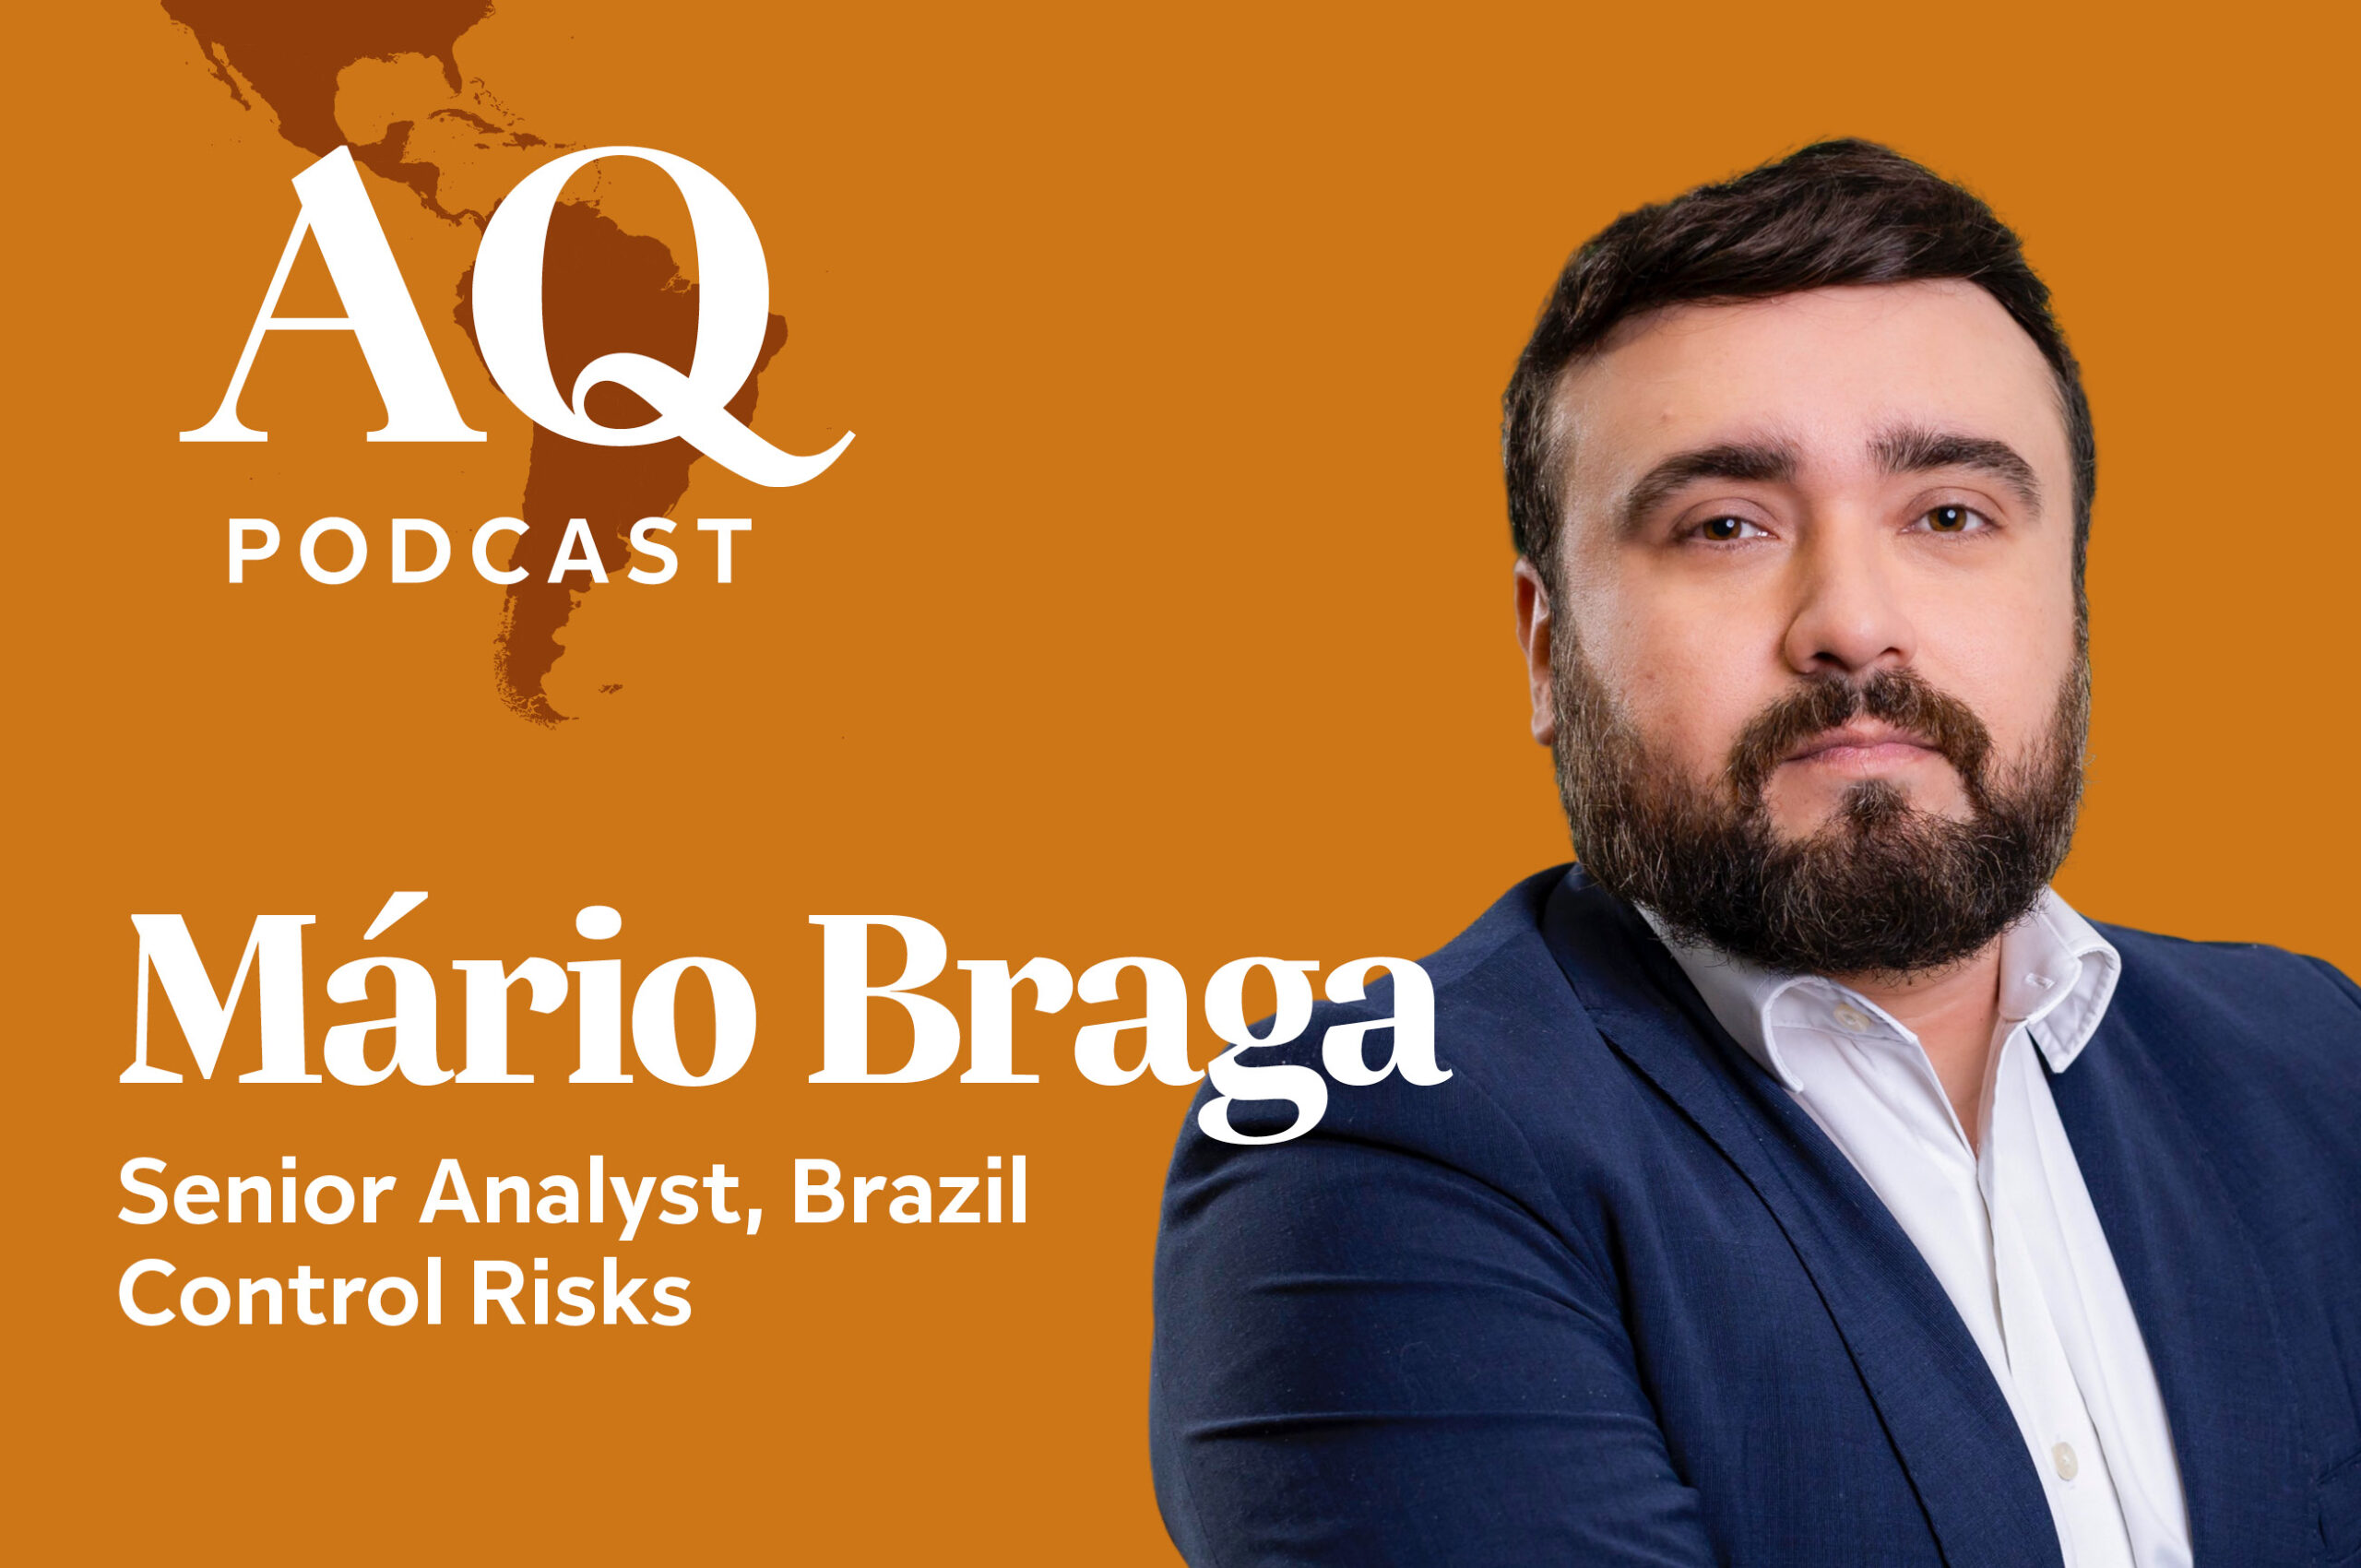 Are Warning Lights Flashing for Brazil’s Economy?